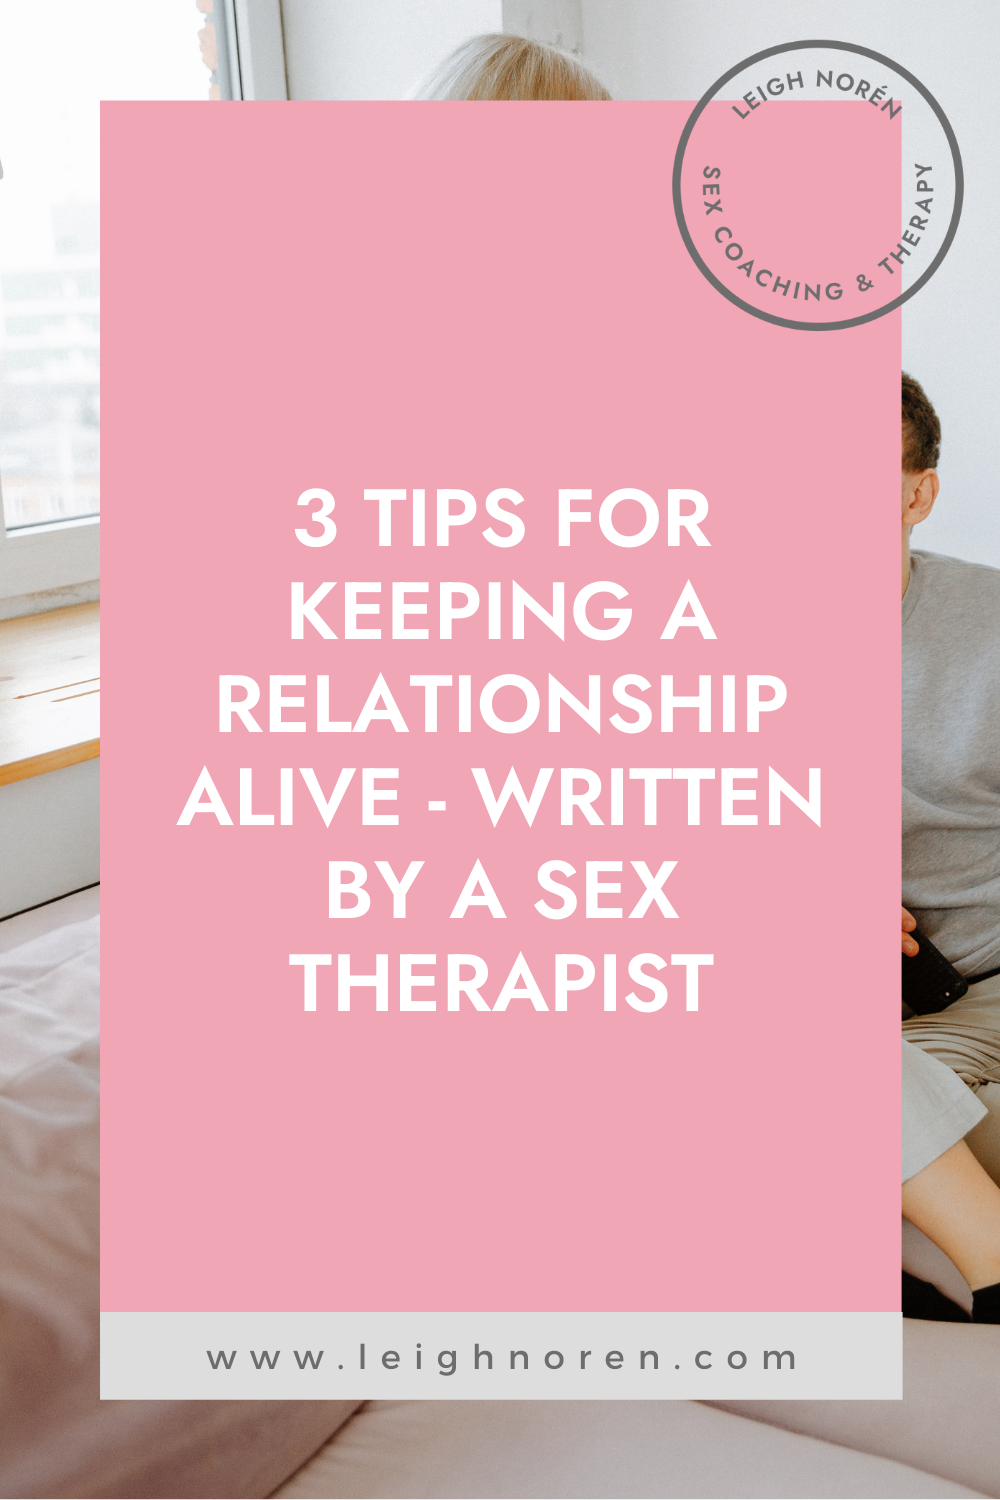 3 Tips for Keeping a Relationship Alive - By a Sex Therapist